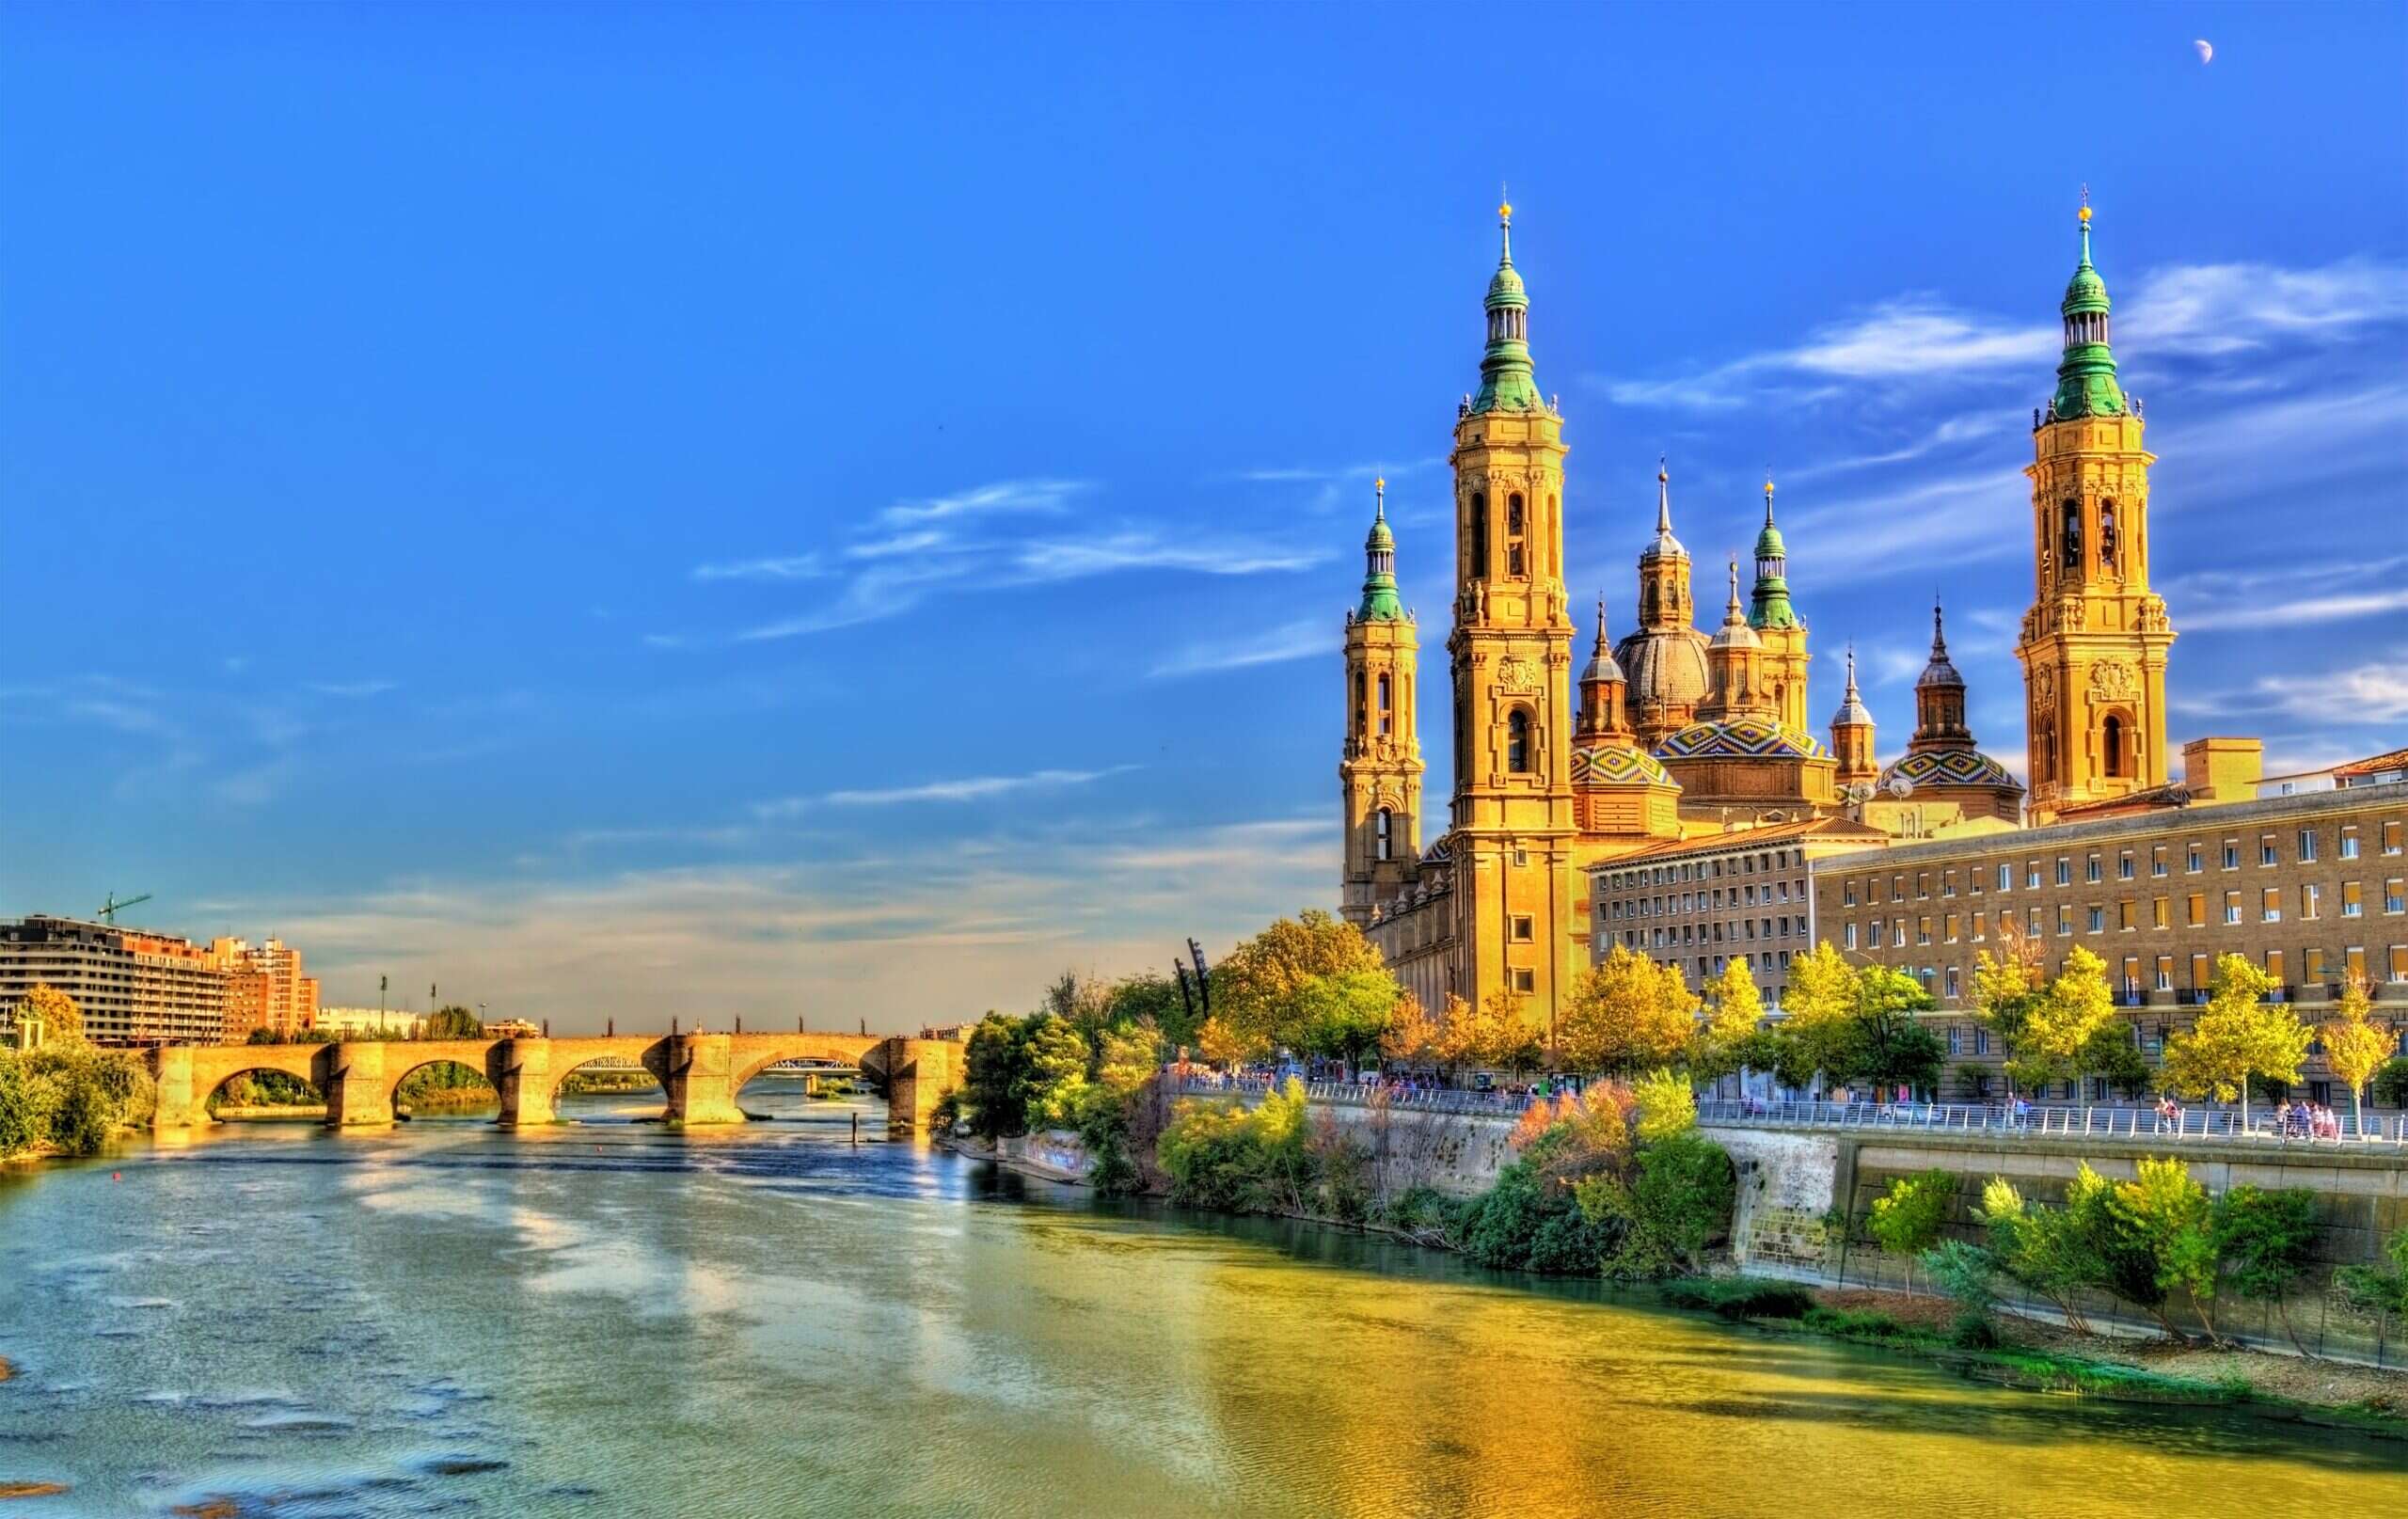 zaragoza cathedral and river view